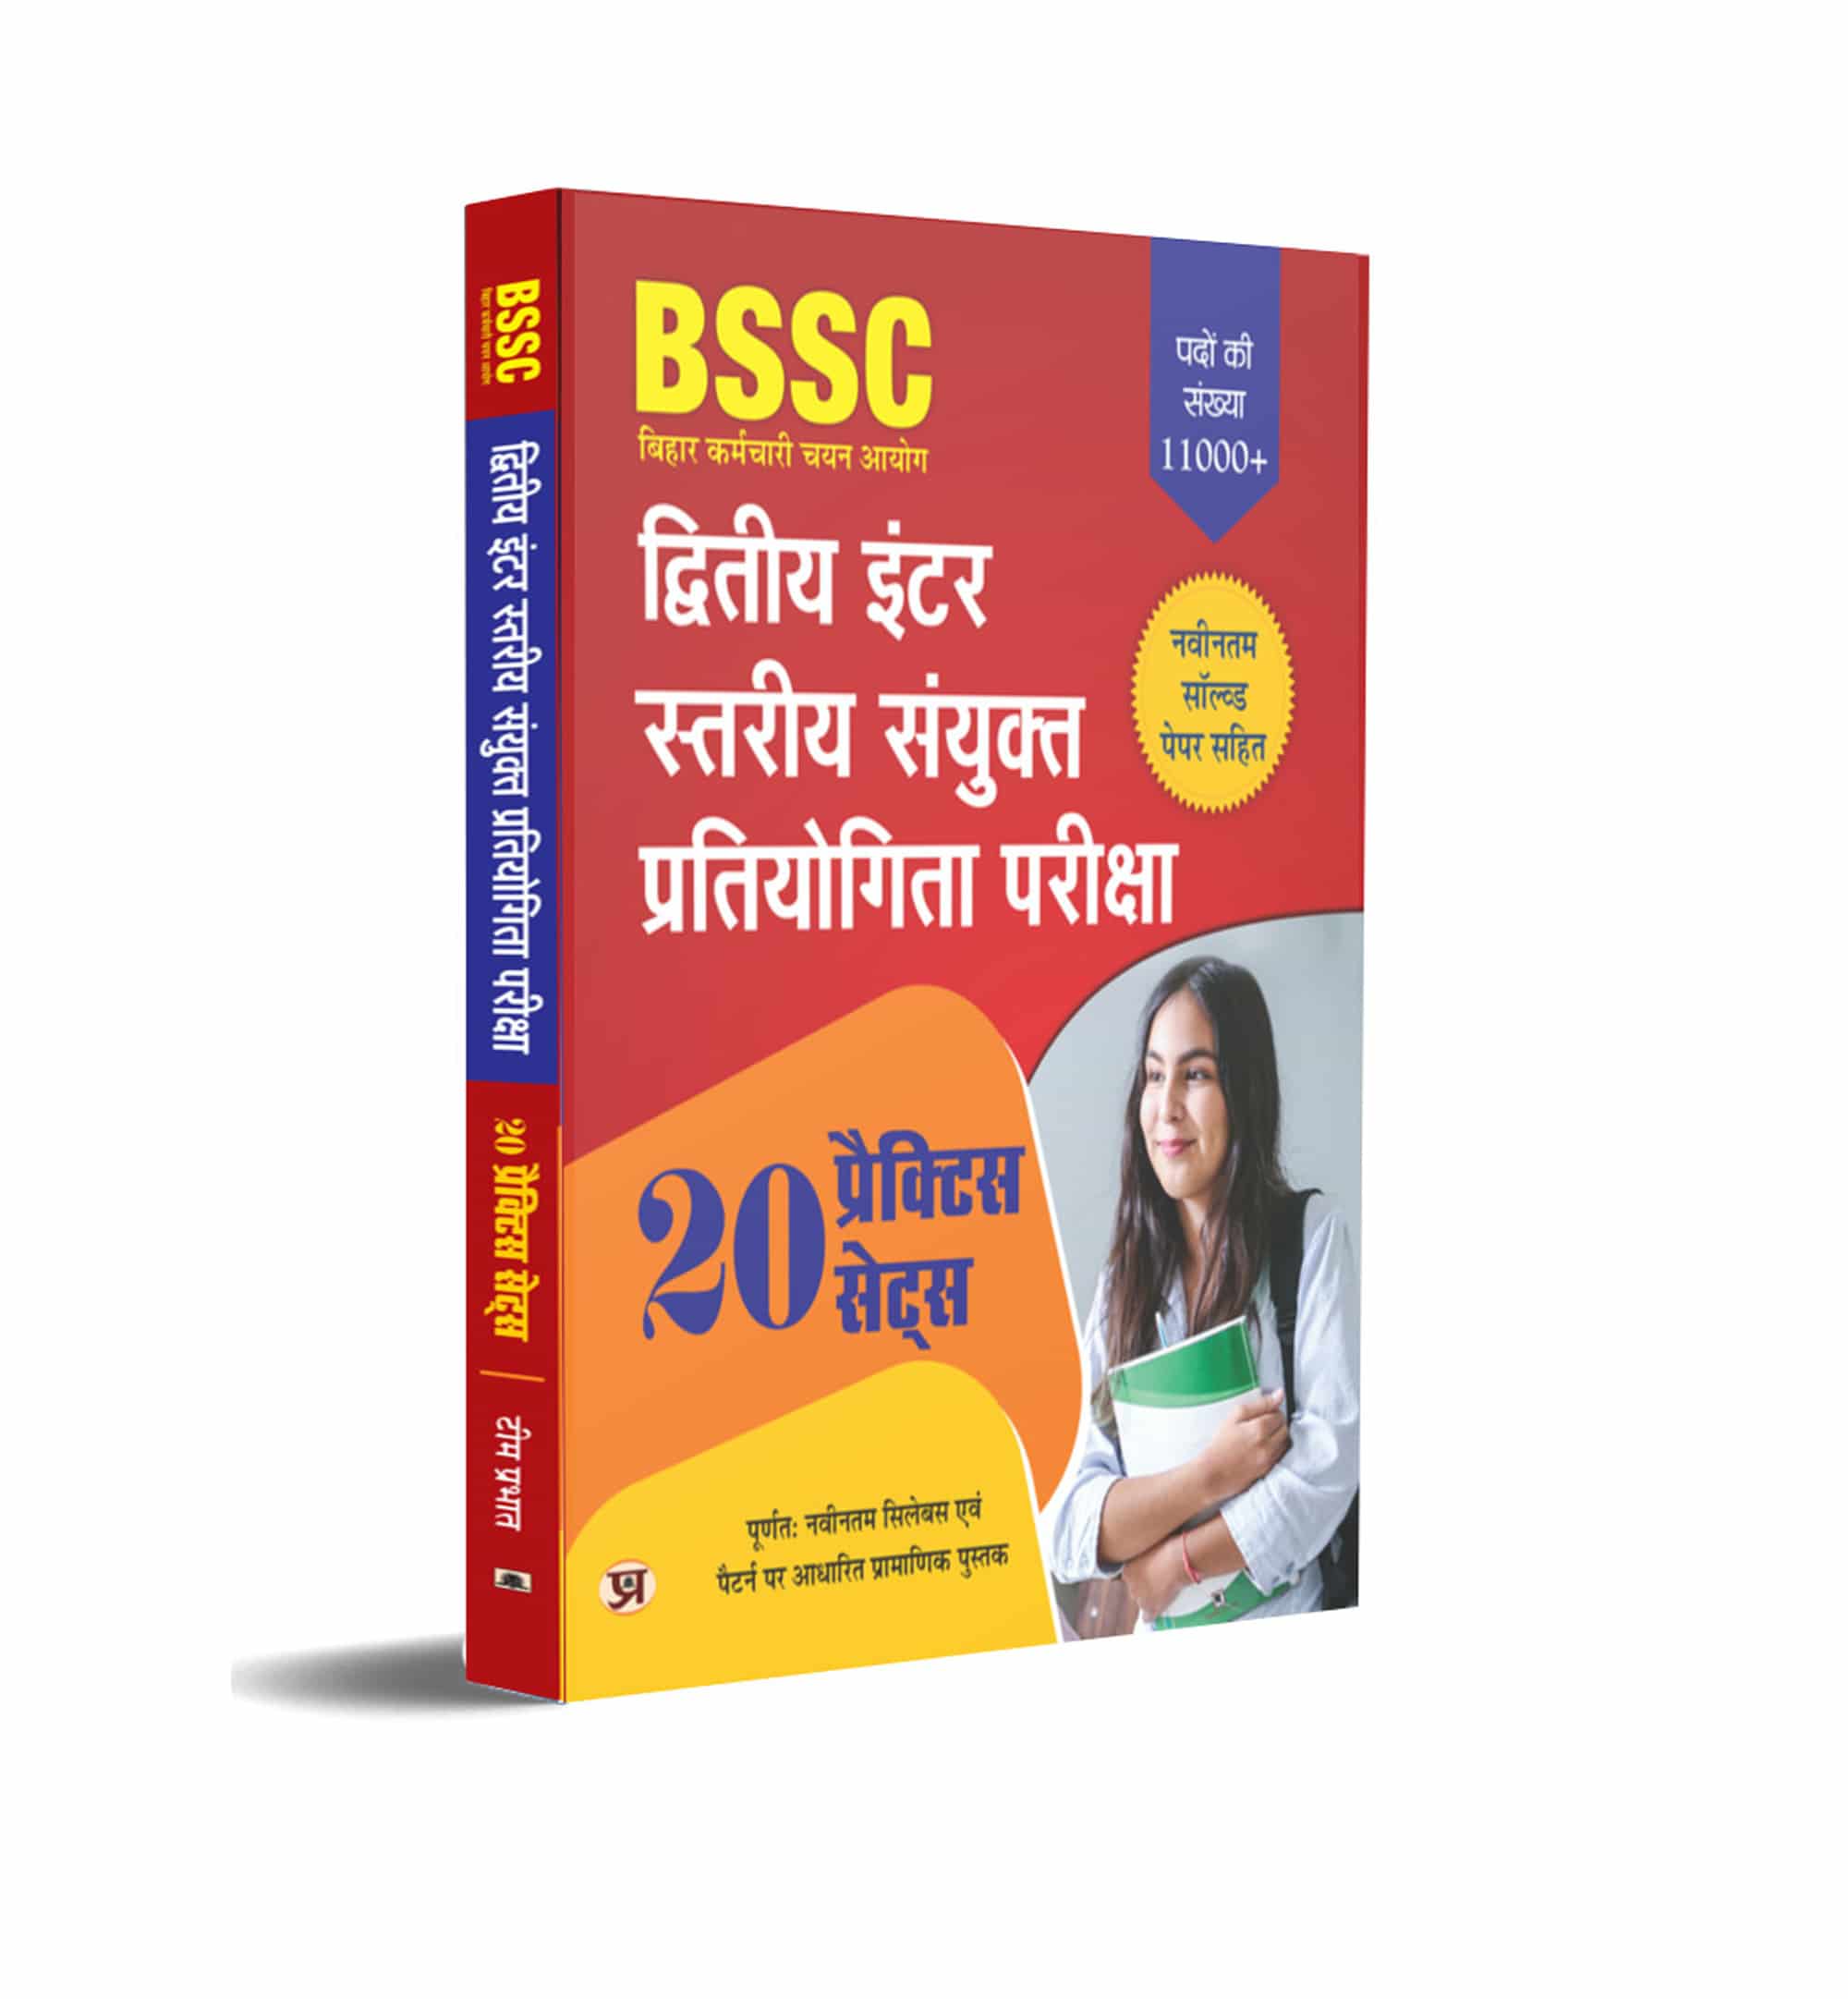 BSSC Bihar Secondary Intermediate Combined Competitive Examination \